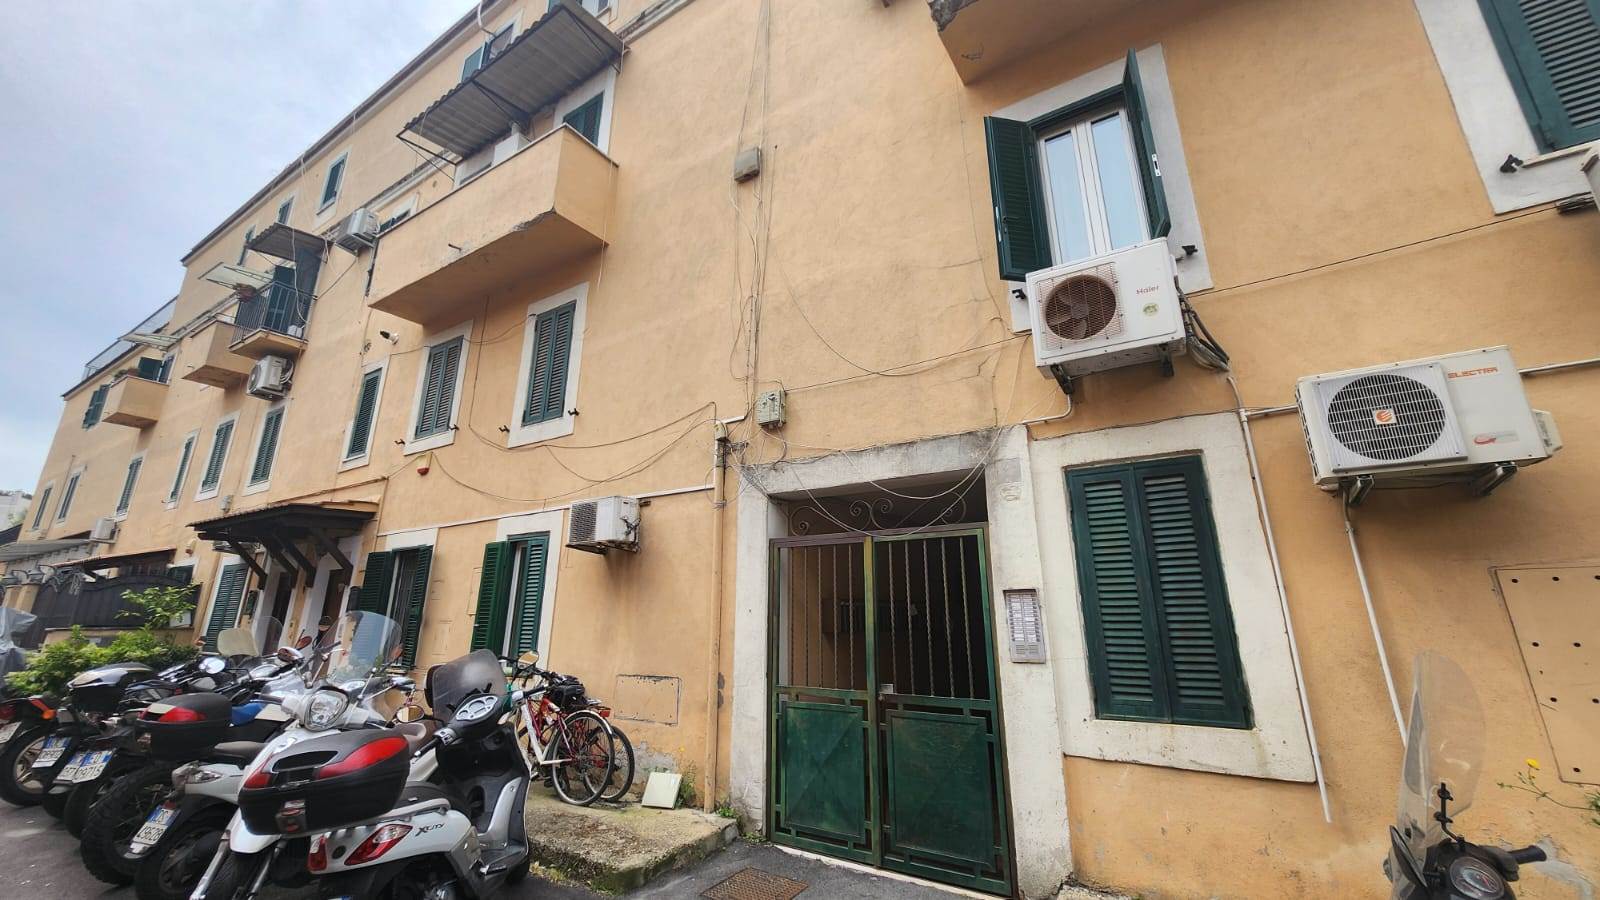 TUSCOLANO, ROMA, Loft for rent of 1 Sq. mt., Good condition, Heating Individual heating system, Energetic class: G, Epi: 175 kwh/m2 year, placed at Ground, composed by: 1 Room, Kitchenette, 1 Bedroom,